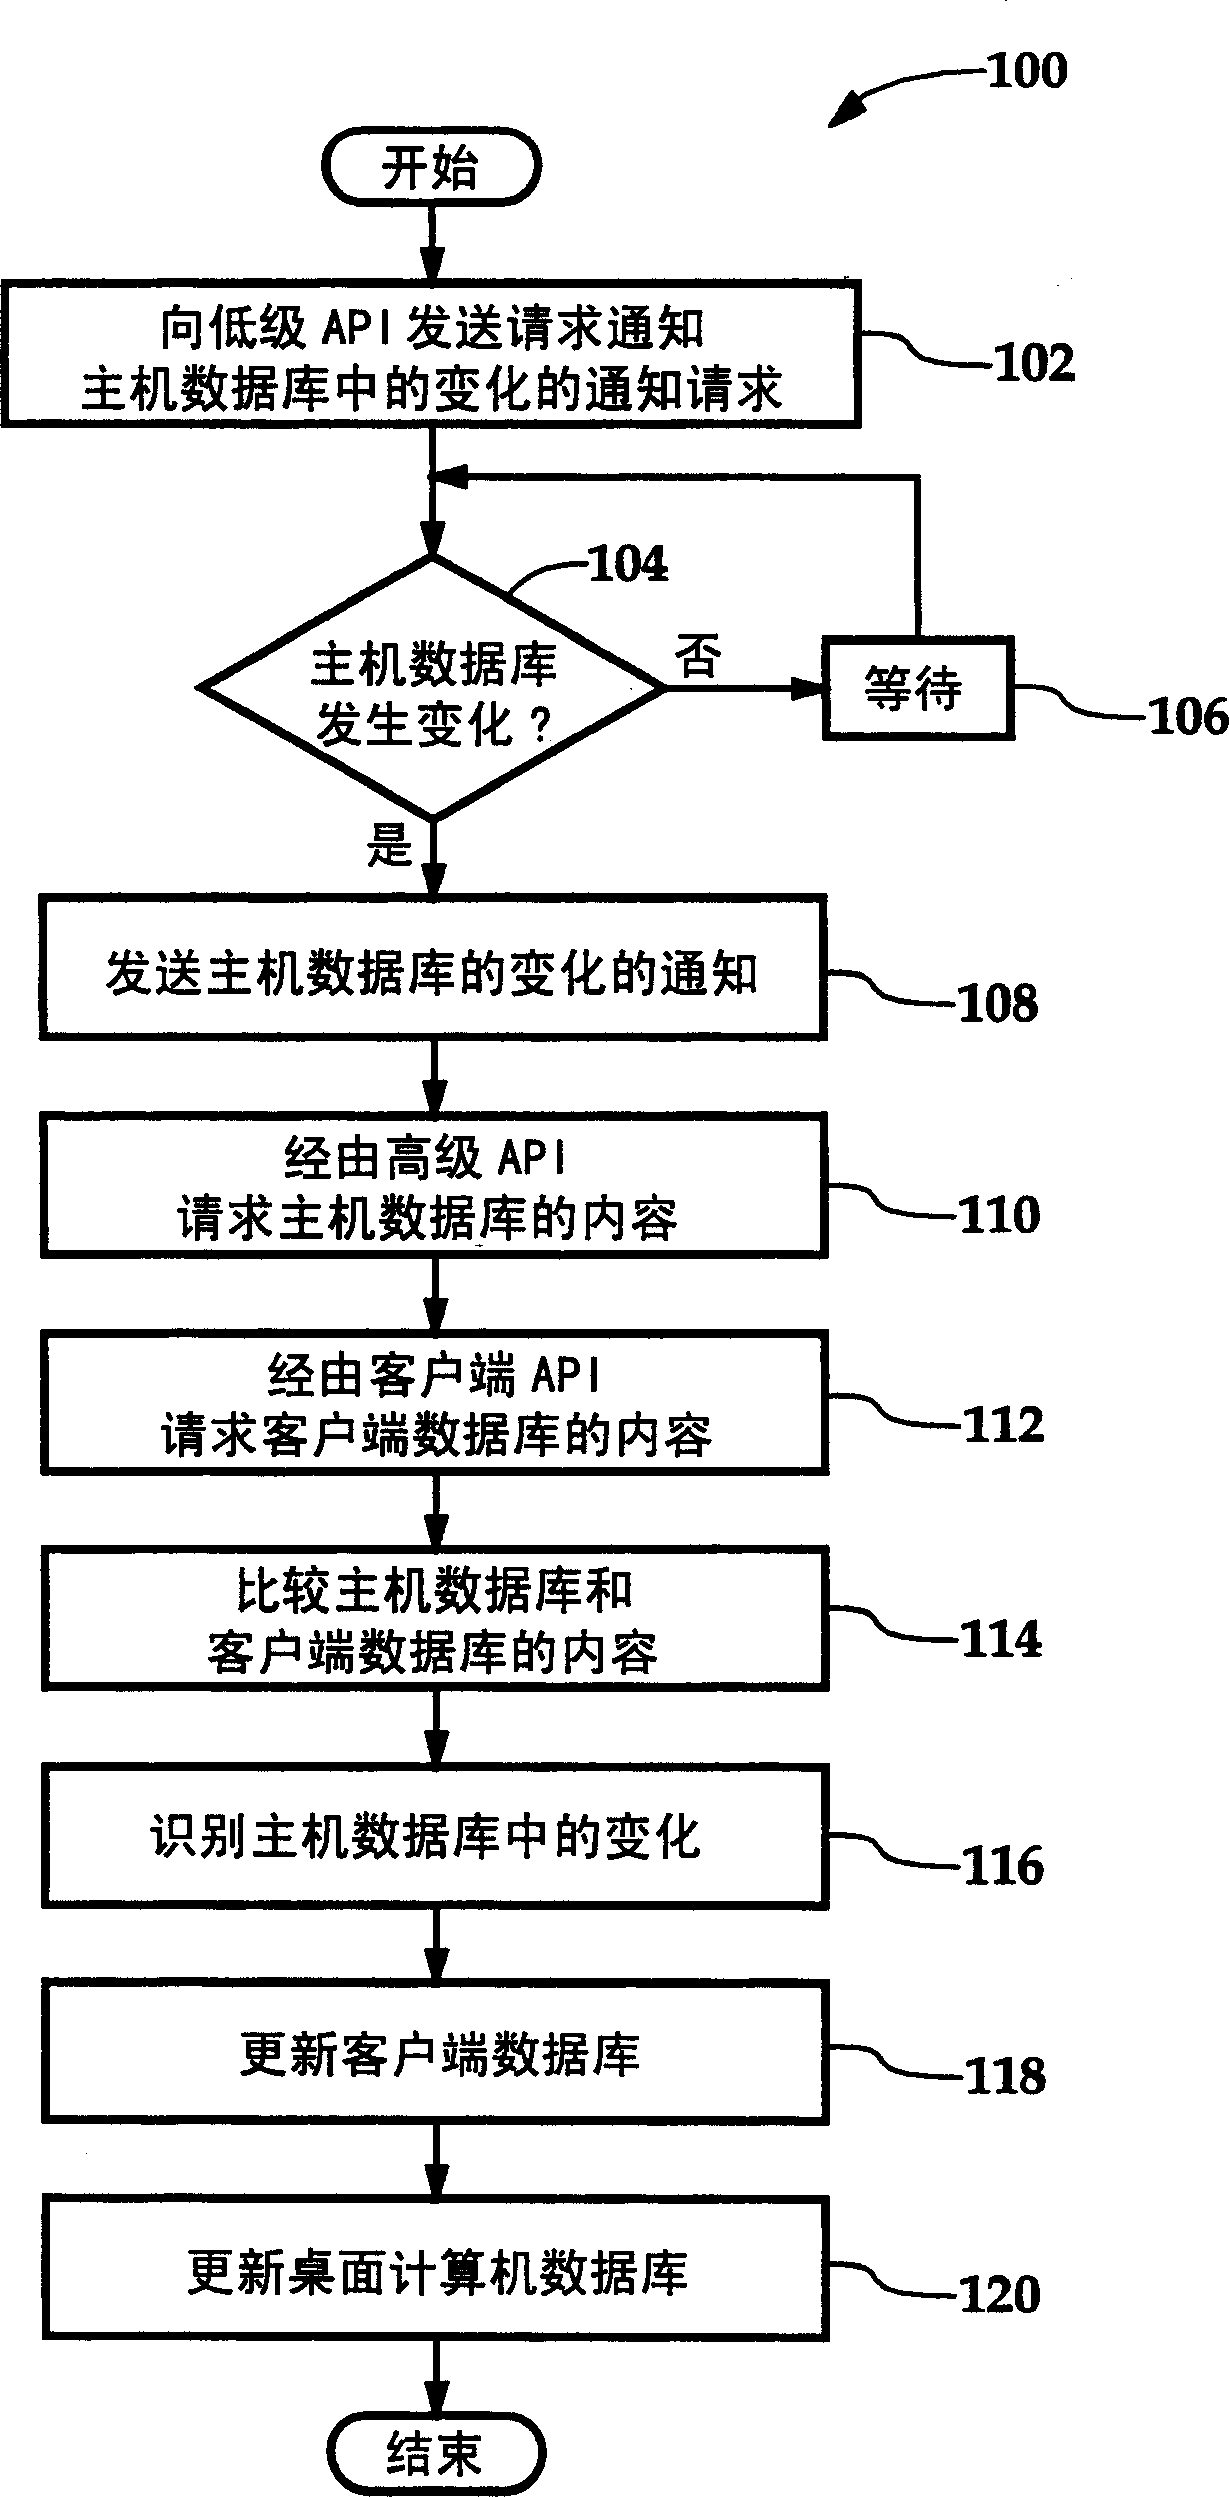 System and method for integrating continuous synchronizationon a host handheld device